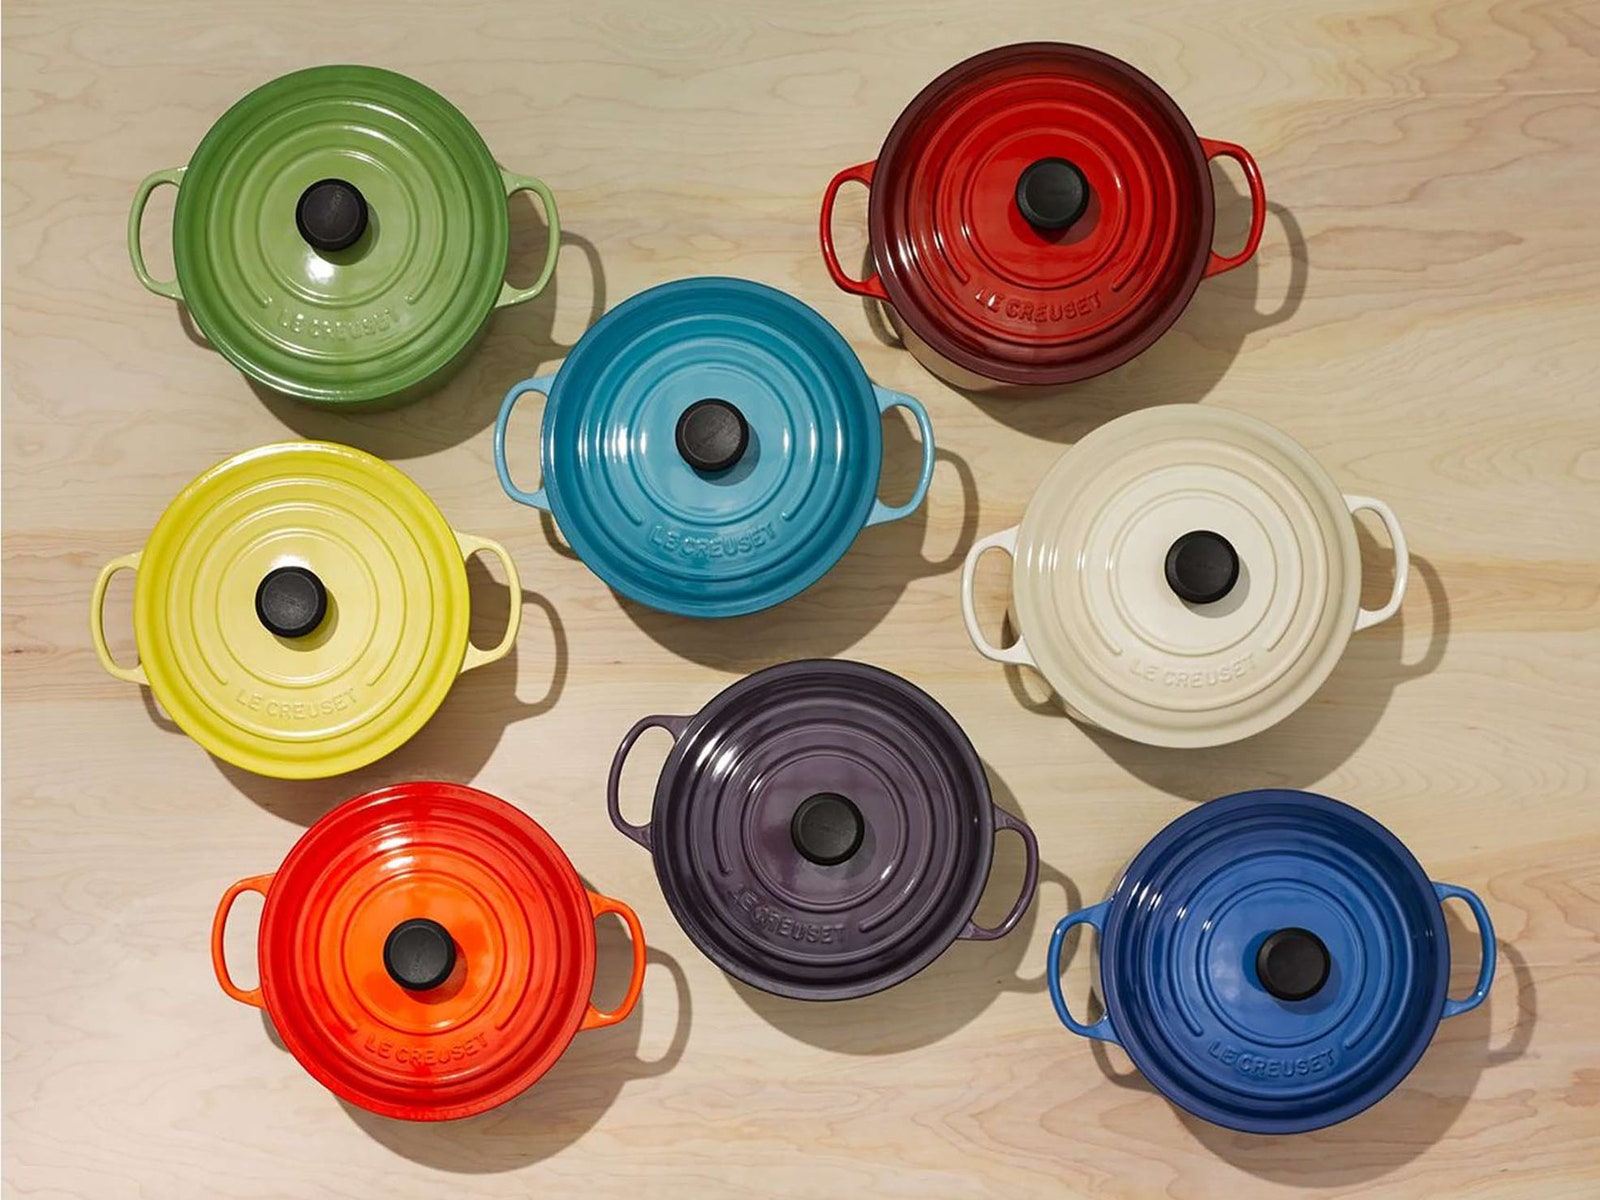 The Best October Prime Day Deals on Le Creuset